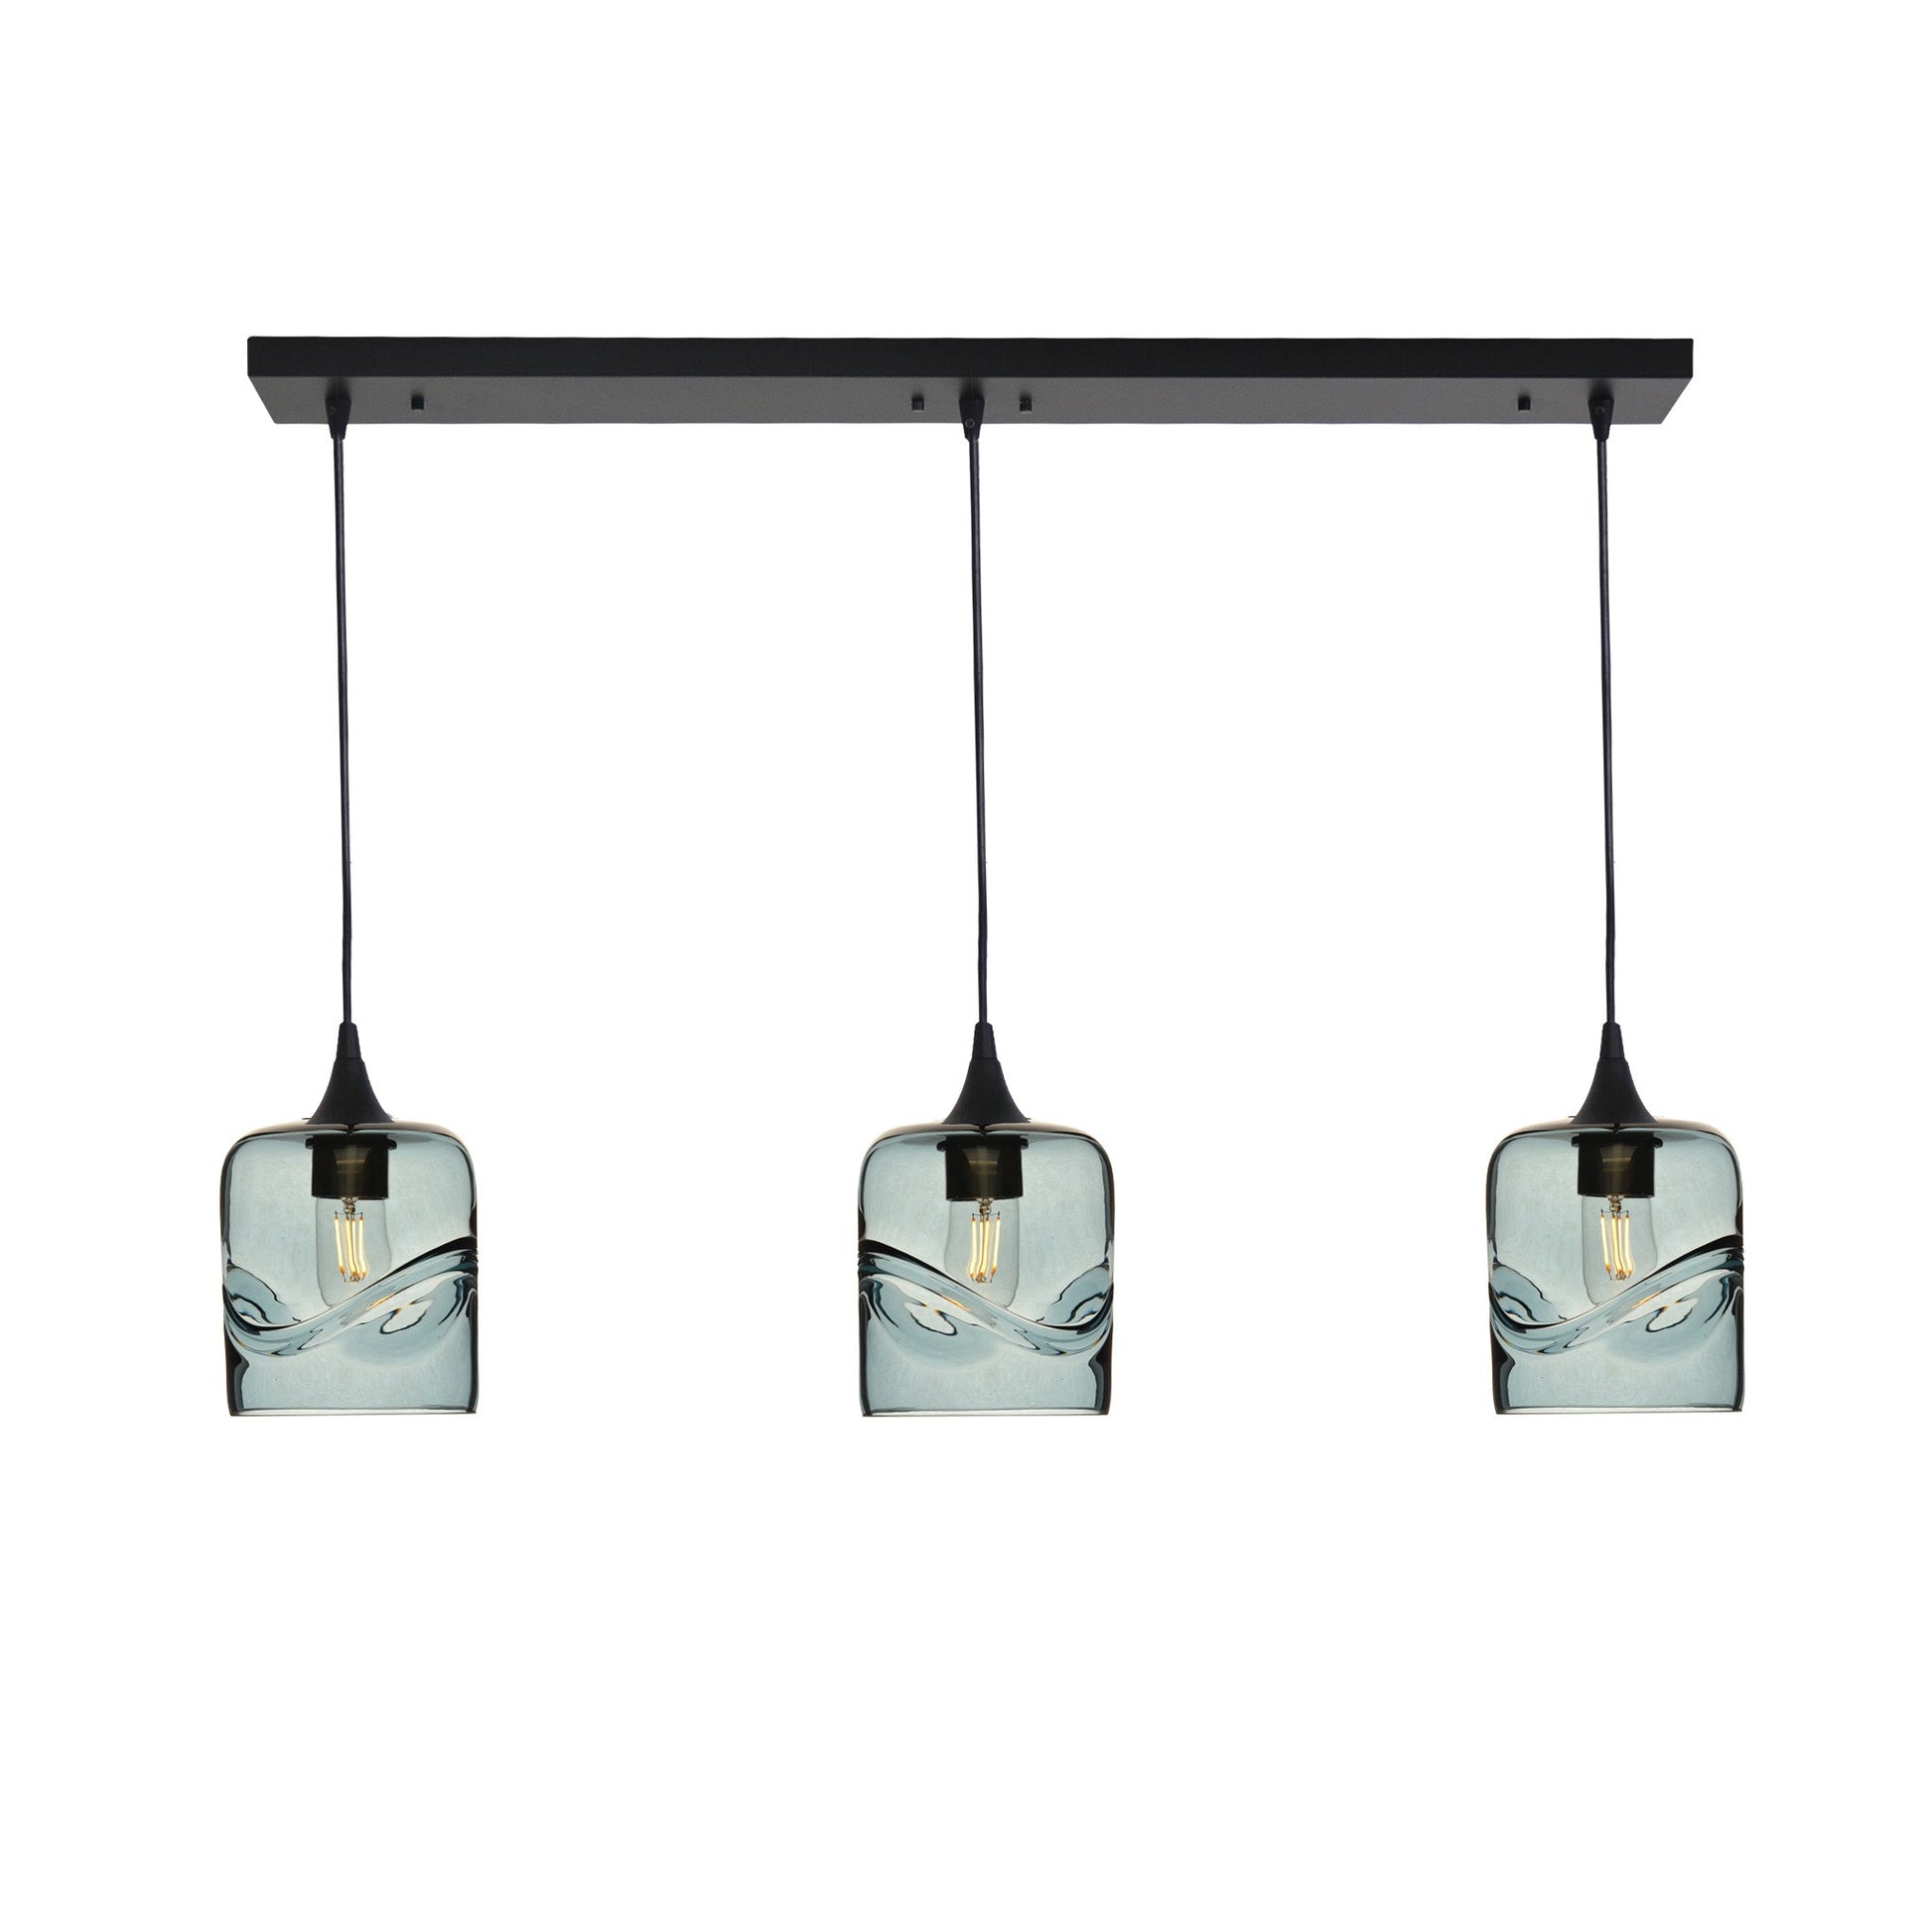 603 Swell: 3 Pendant Linear Chandelier-Glass-Bicycle Glass Co - Hotshop-Slate Gray-Bicycle Glass Co